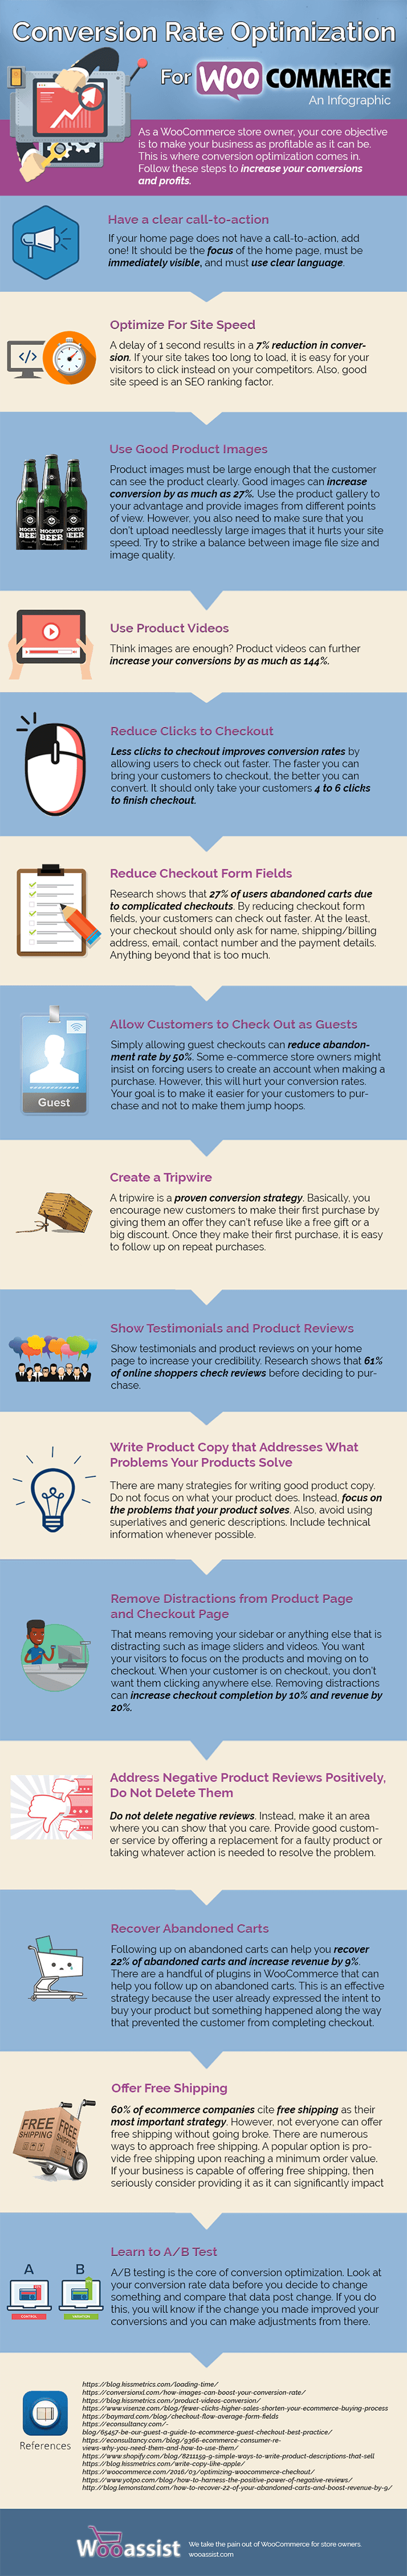 Conversion Rate Optimization for WooCommerce - An Infographic by Wooassist